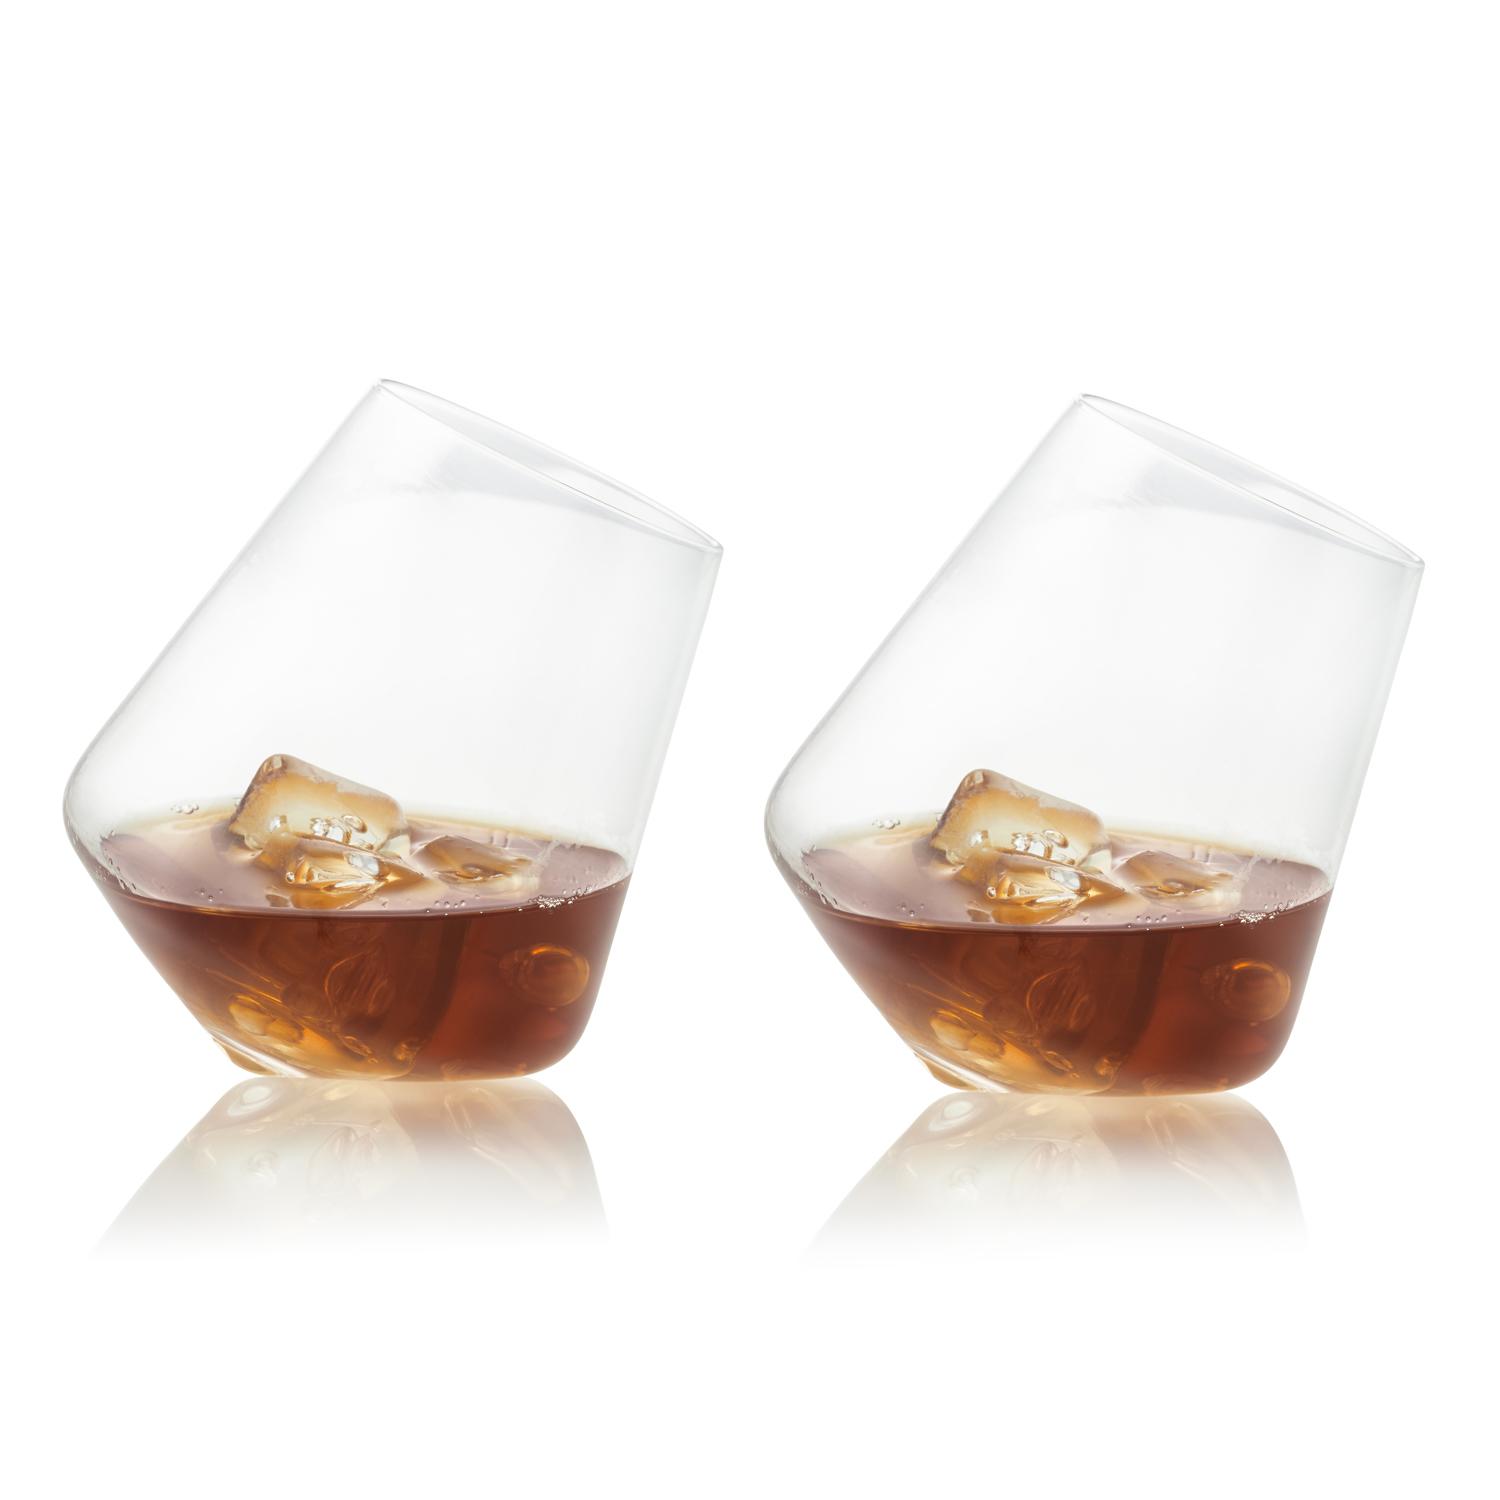 Uberstar Rolling Glasses - Only £14.99 (Pair)